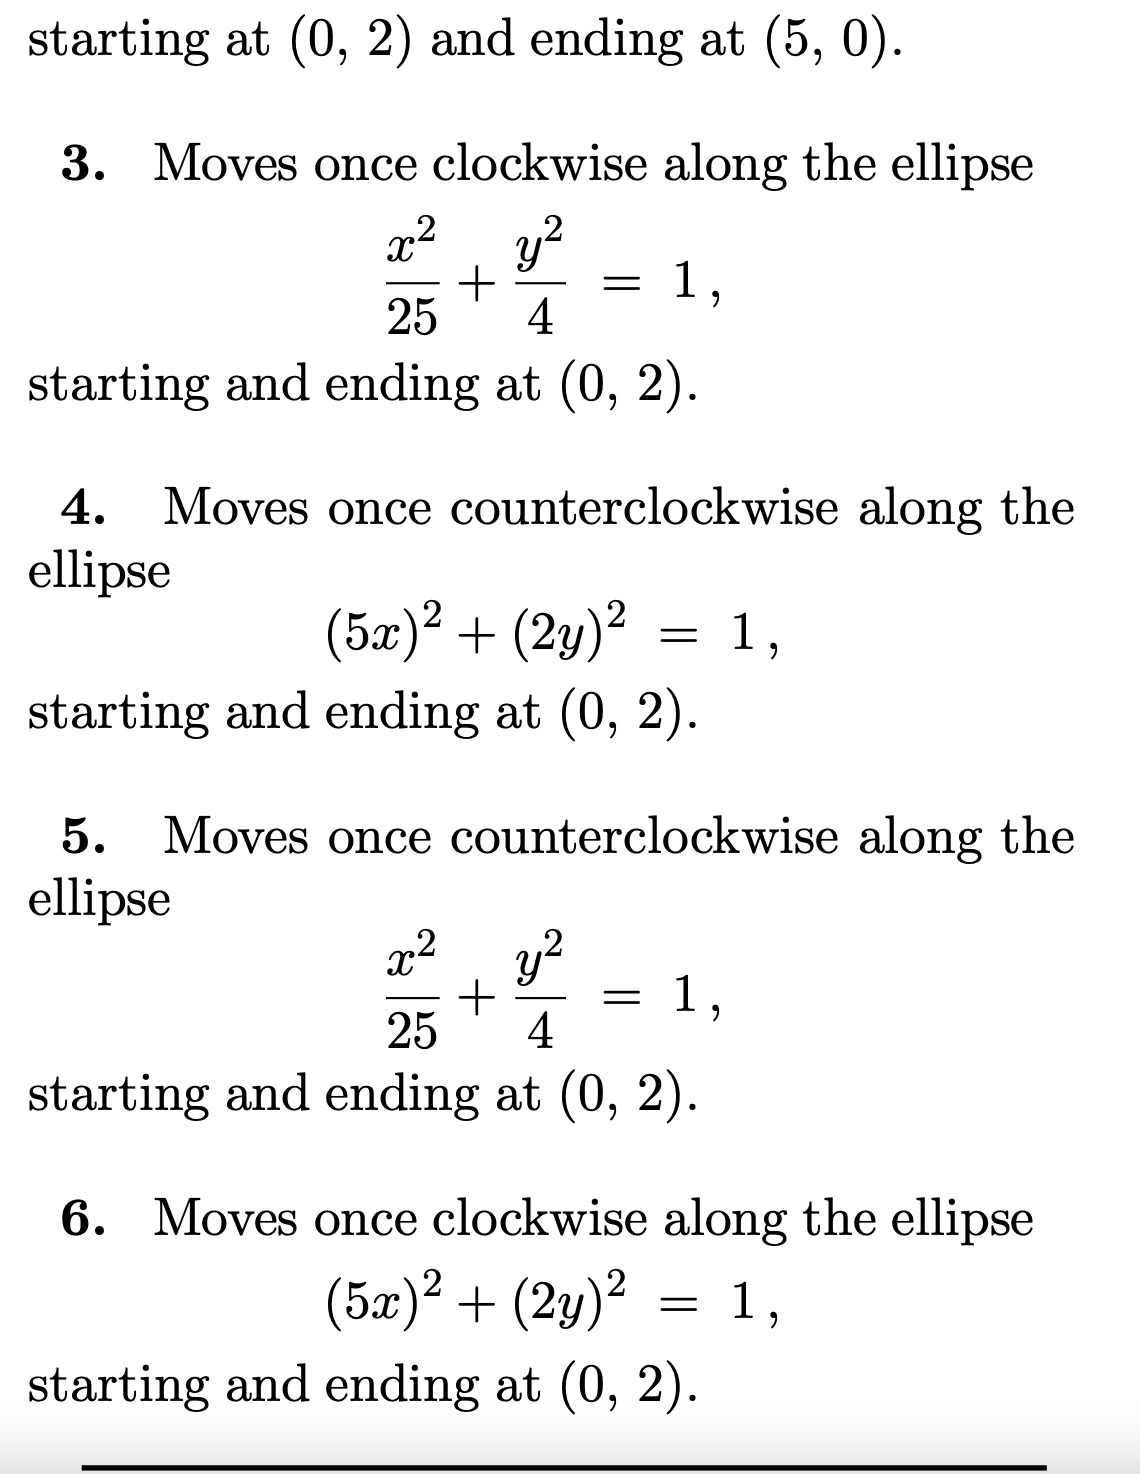 starting at (0, 2) and ending at (5, 0).
3. Moves once clockwise along the ellipse
x², y?
1,
25
4
starting and ending at (0, 2).
4. Moves once counterclockwise along the
ellipse
(5æ)² + (2y)² = 1,
starting and ending at (0, 2).
Moves once counterclockwise along the
5.
ellipse
x2
1,
25
4
starting and ending at (0, 2).
6. Moves once clockwise along the ellipse
(5æ)² + (2y)² = 1,
starting and ending at (0, 2).
